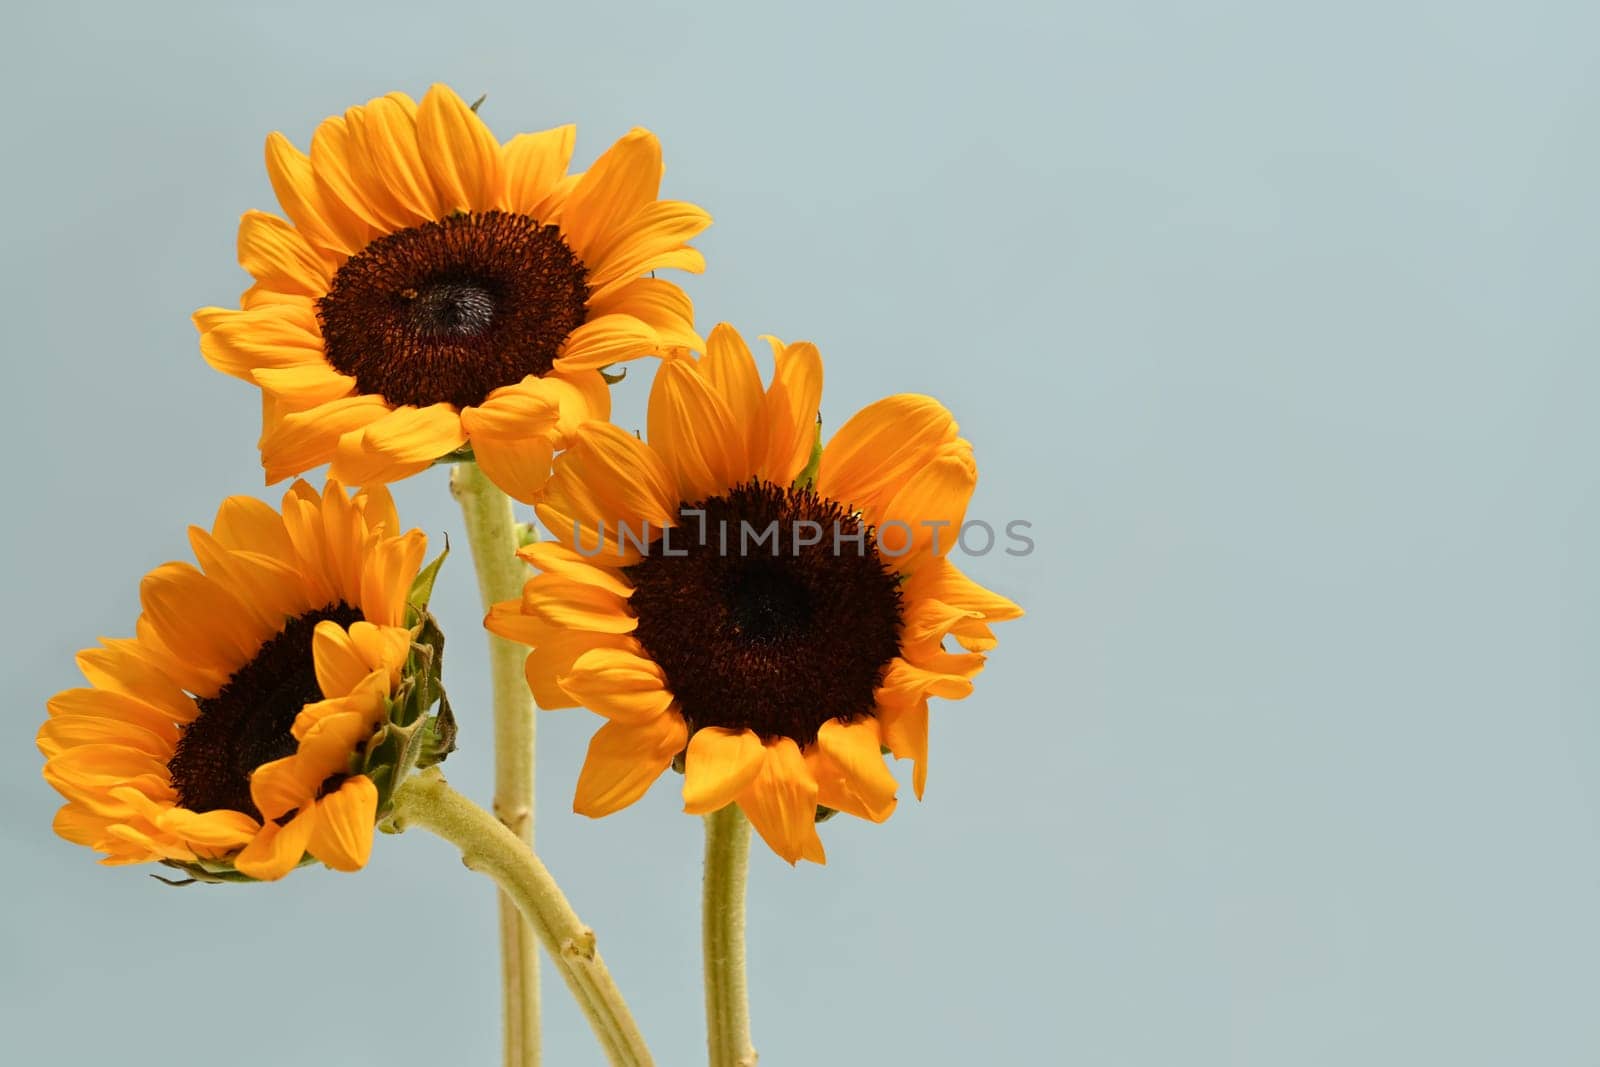 Bouquet of beautiful sunflowers on light blue background. Floral background, copy space for your text by prathanchorruangsak